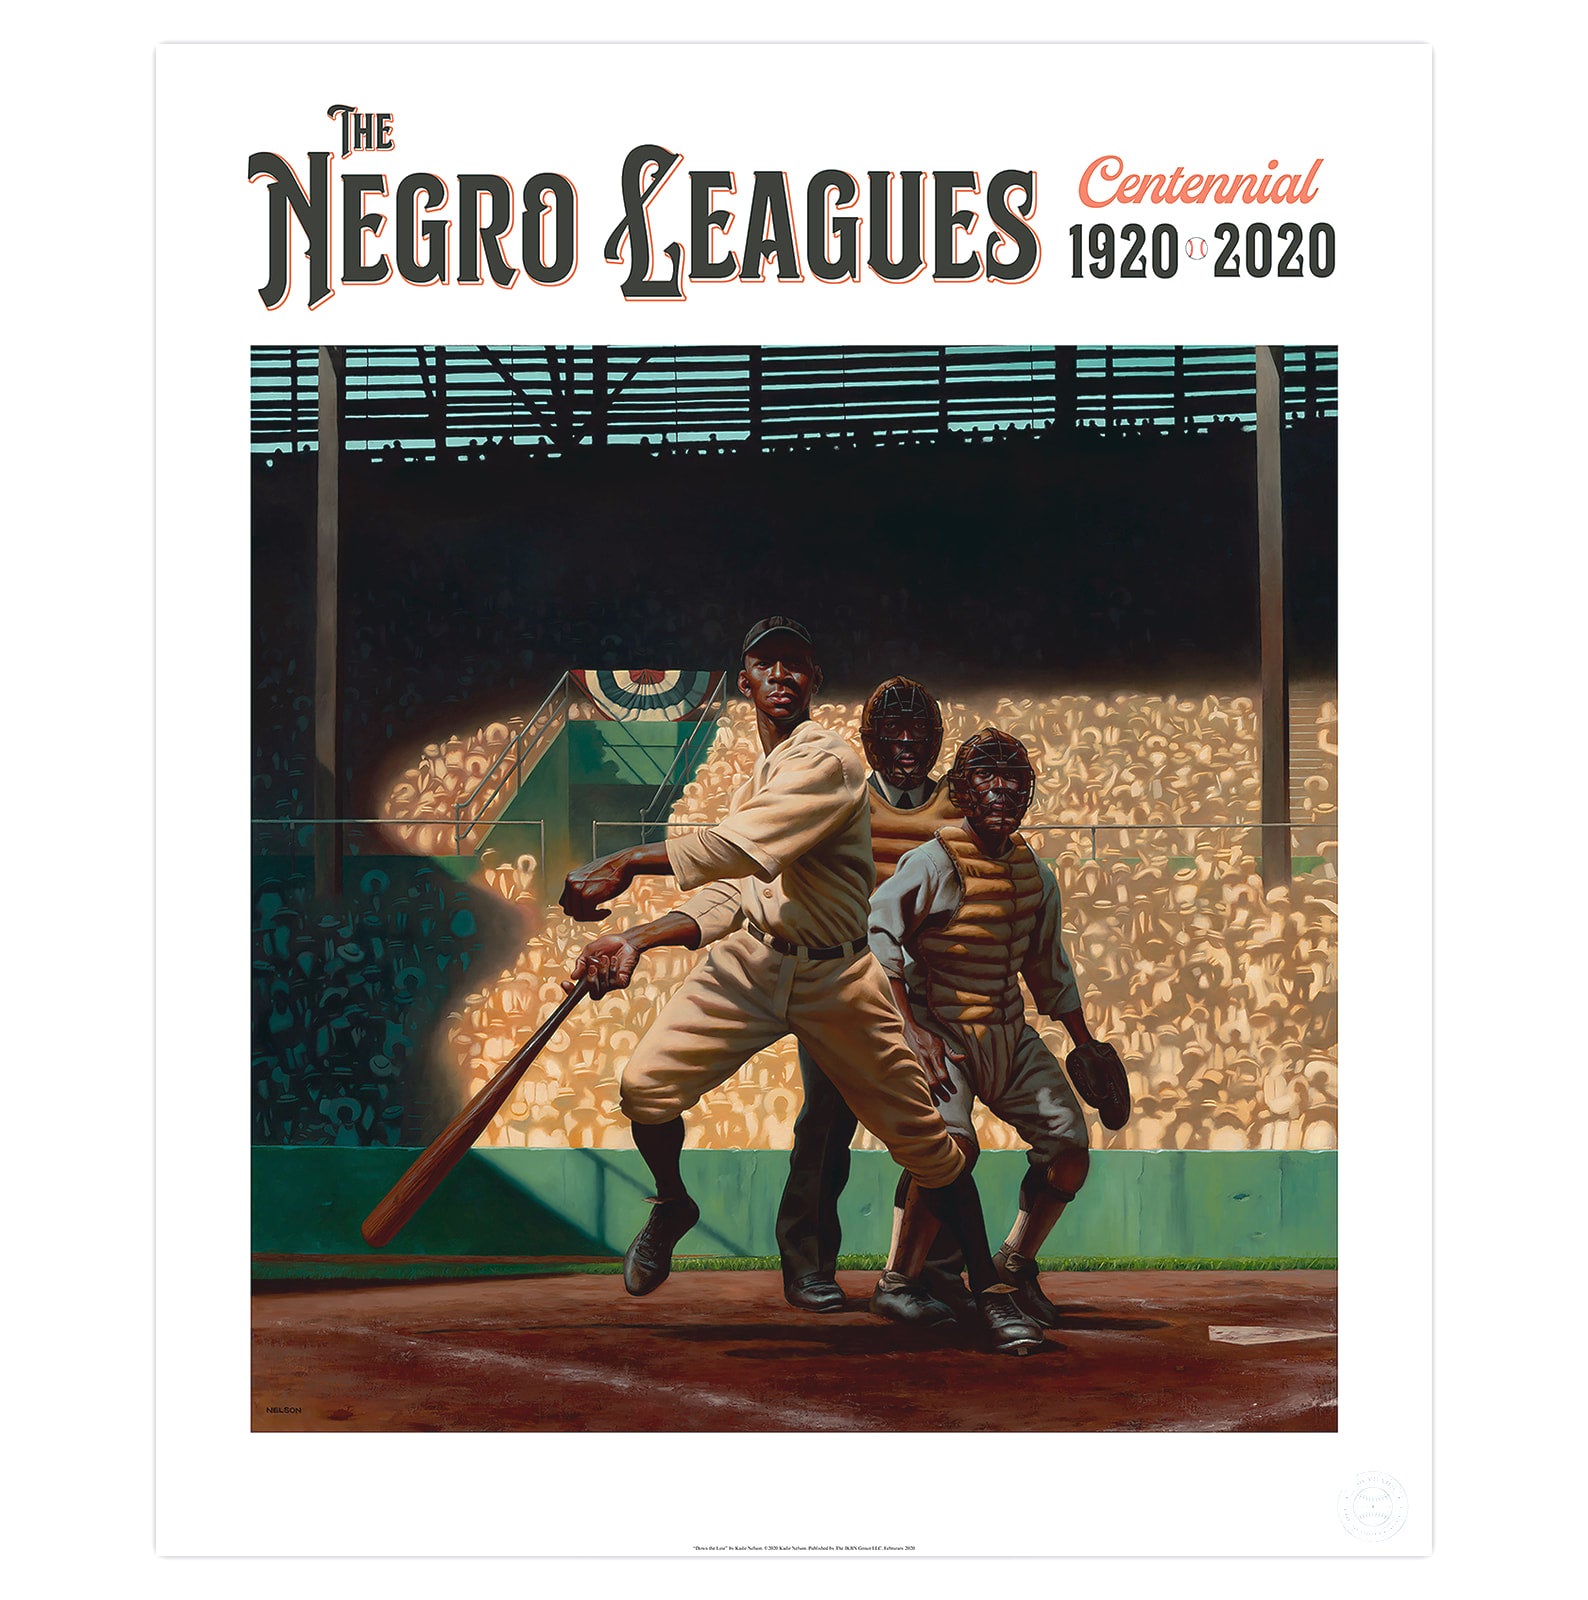 We Are the Ship: Story of Negro League Baseball' at Muskegon Museum of Art  